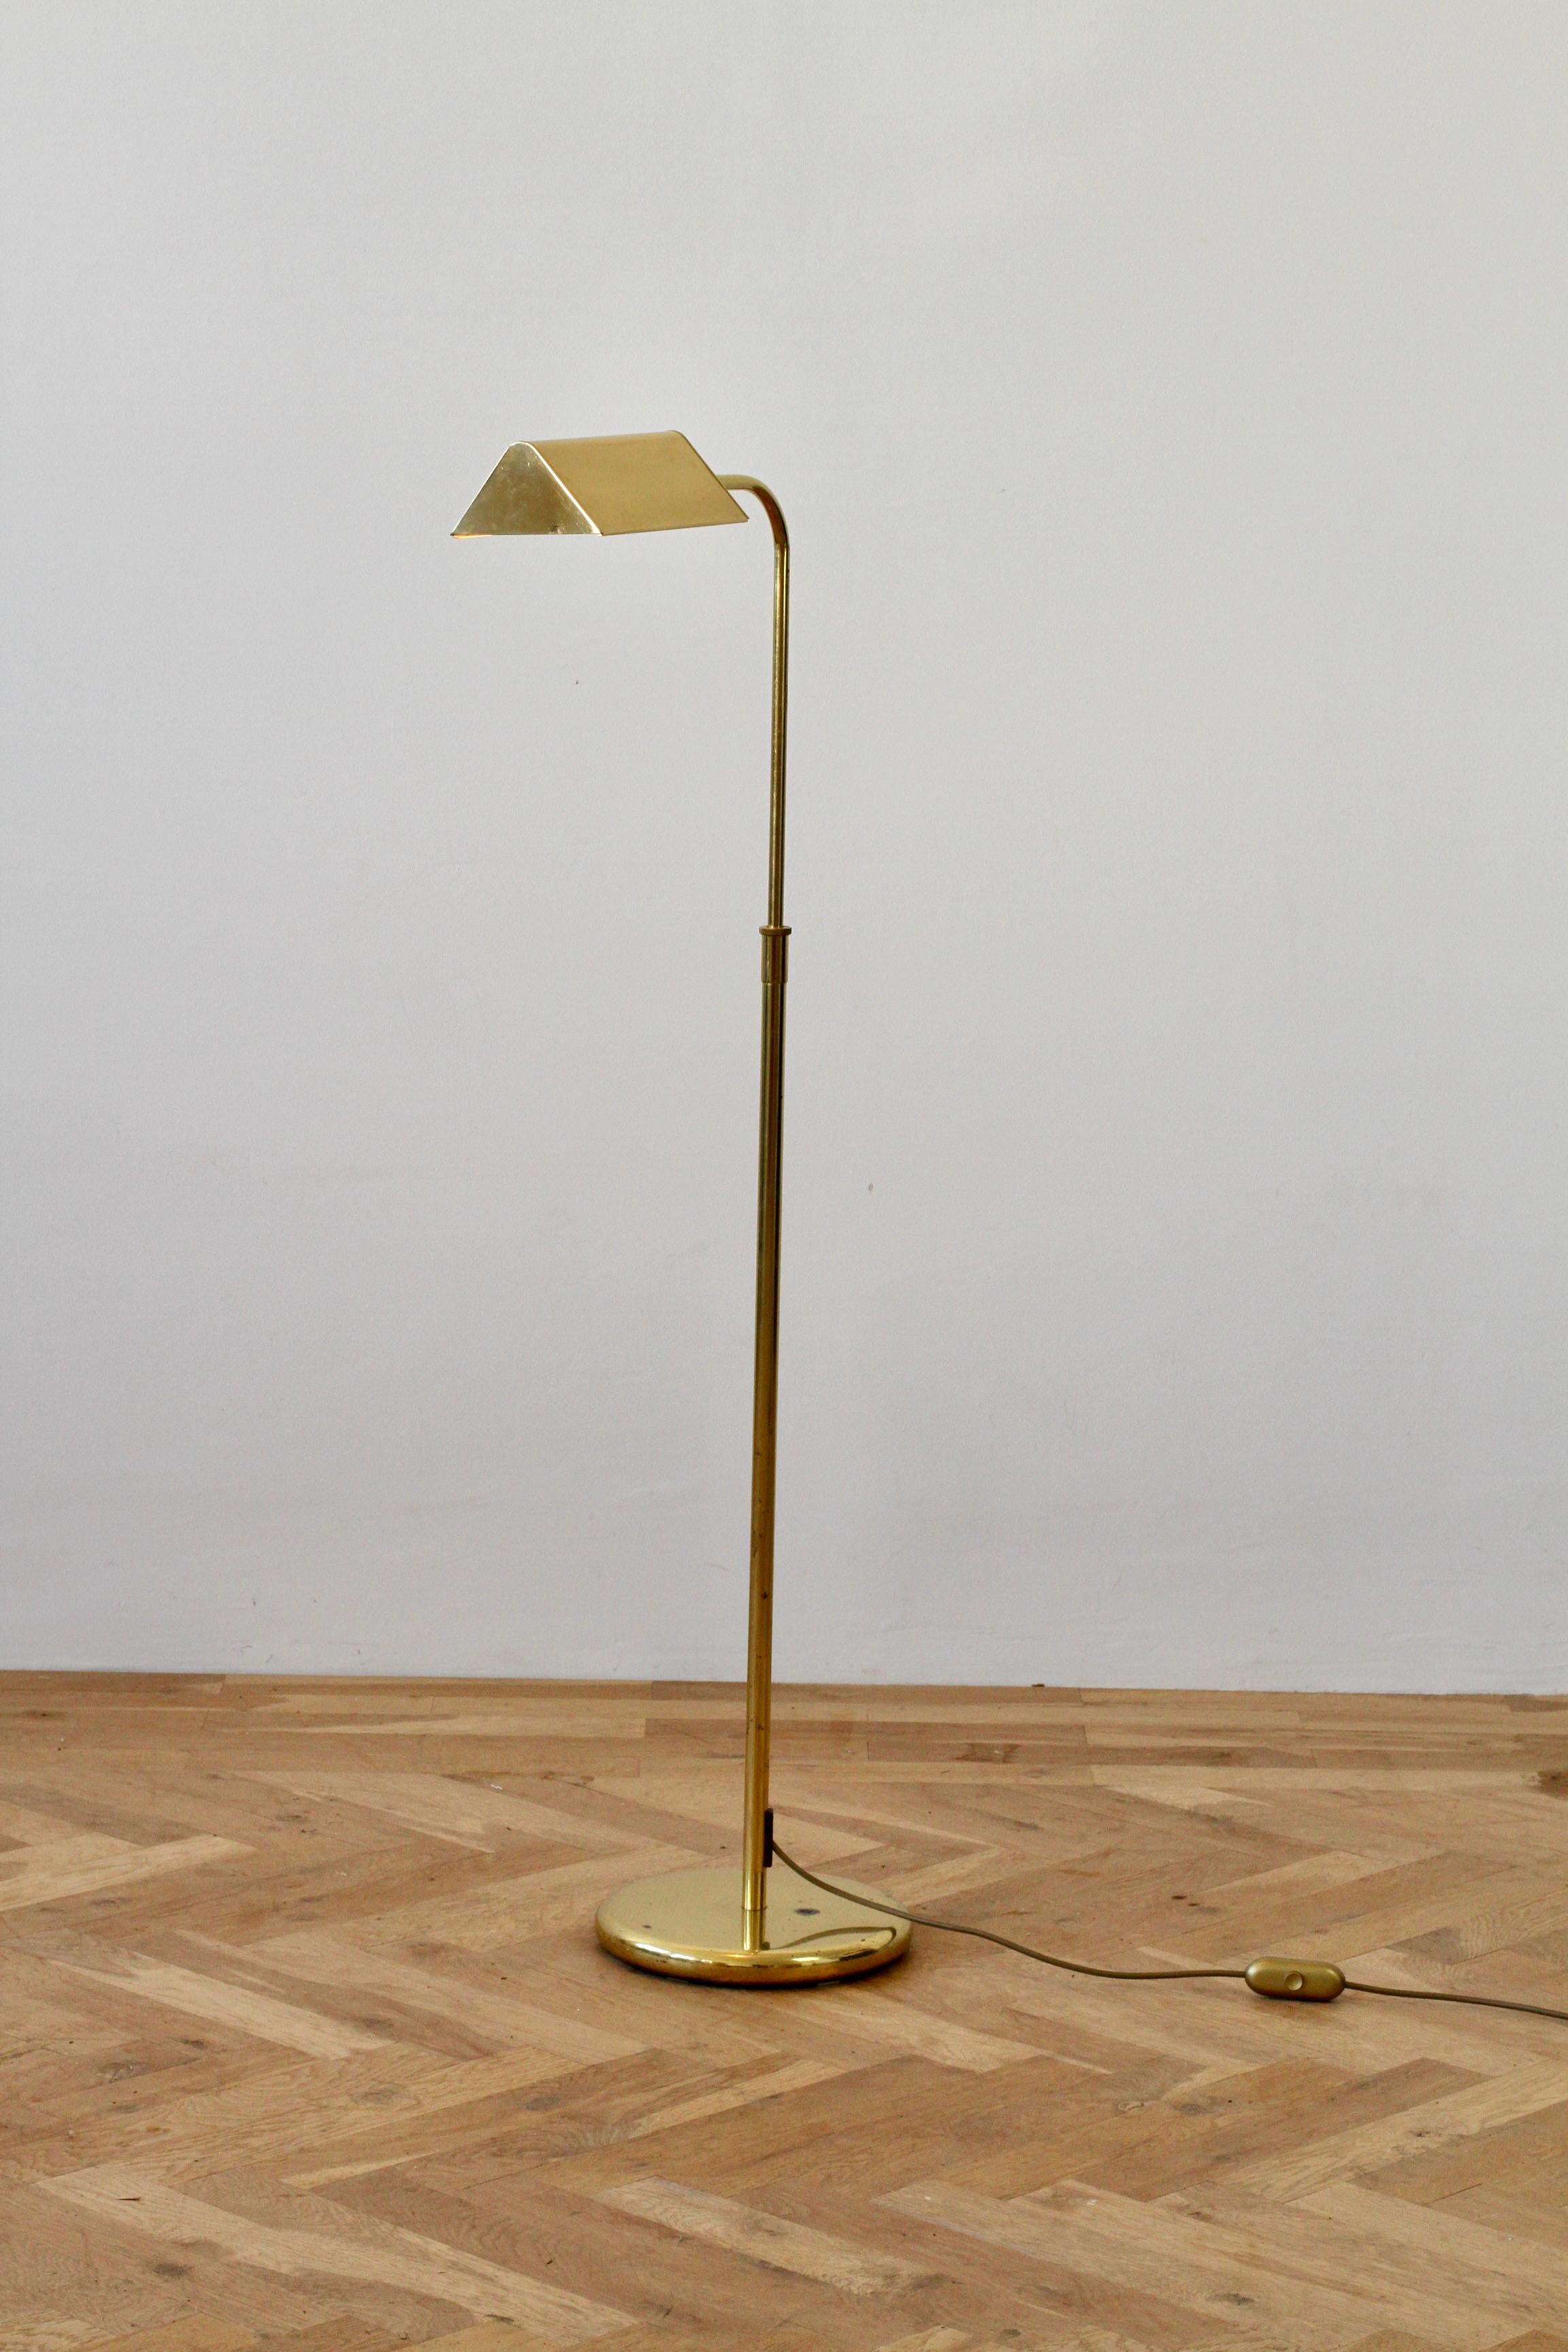 Florian Schulz style Mid-Century Modern vintage German made adjustable reading light or floor lamp by Sölken Leuchten circa late 1970s - early 1980s. Featuring polished brass (now with age related patina) and height adjustable as is the brass shade